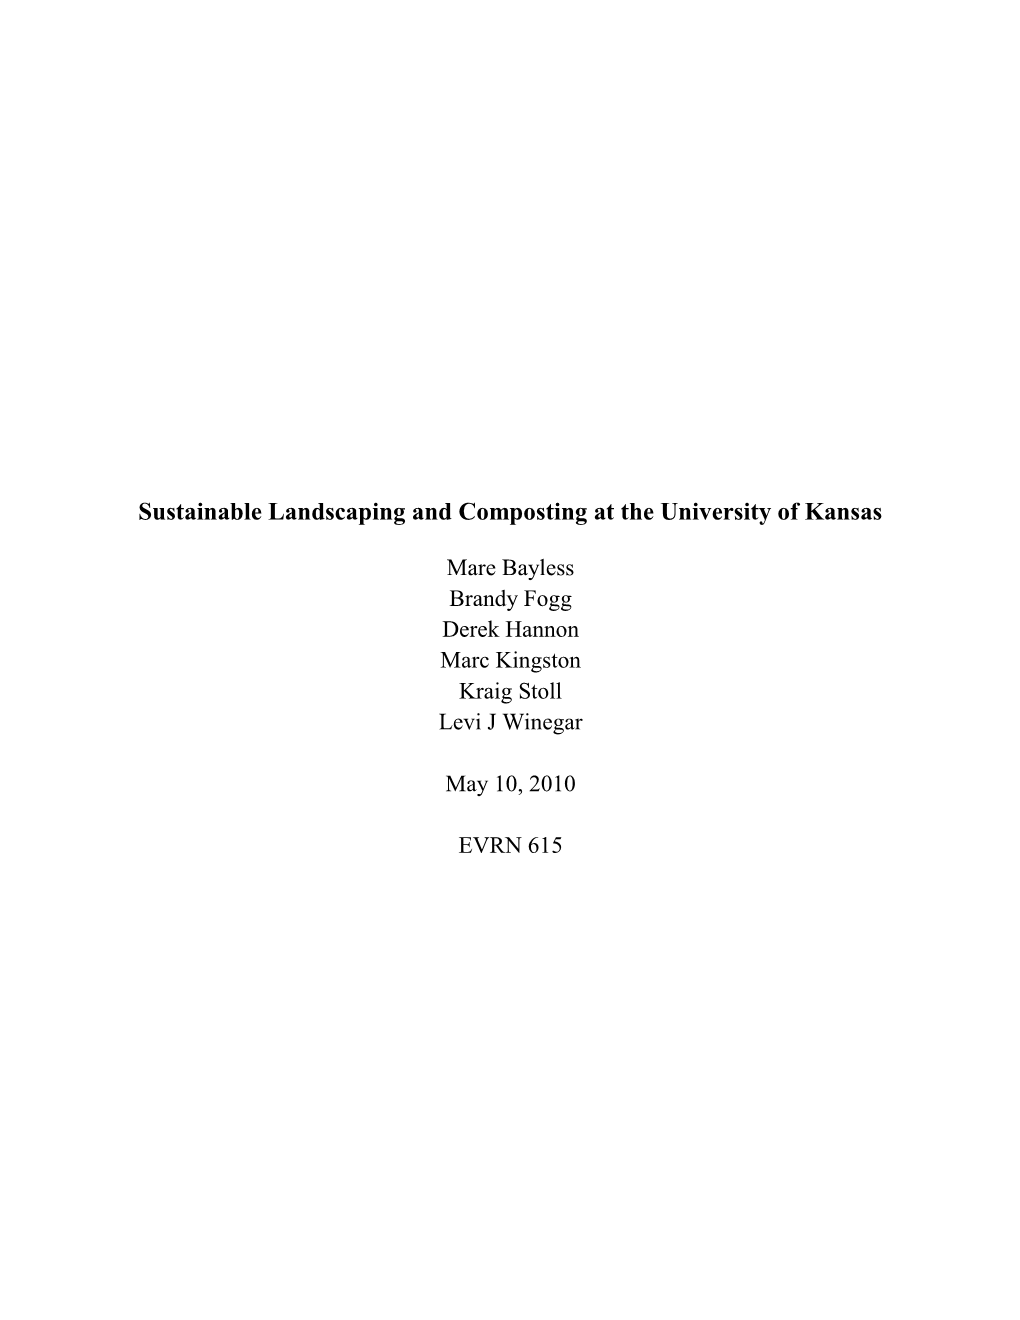 Sustainable Landscaping and Composting at the University of Kansas